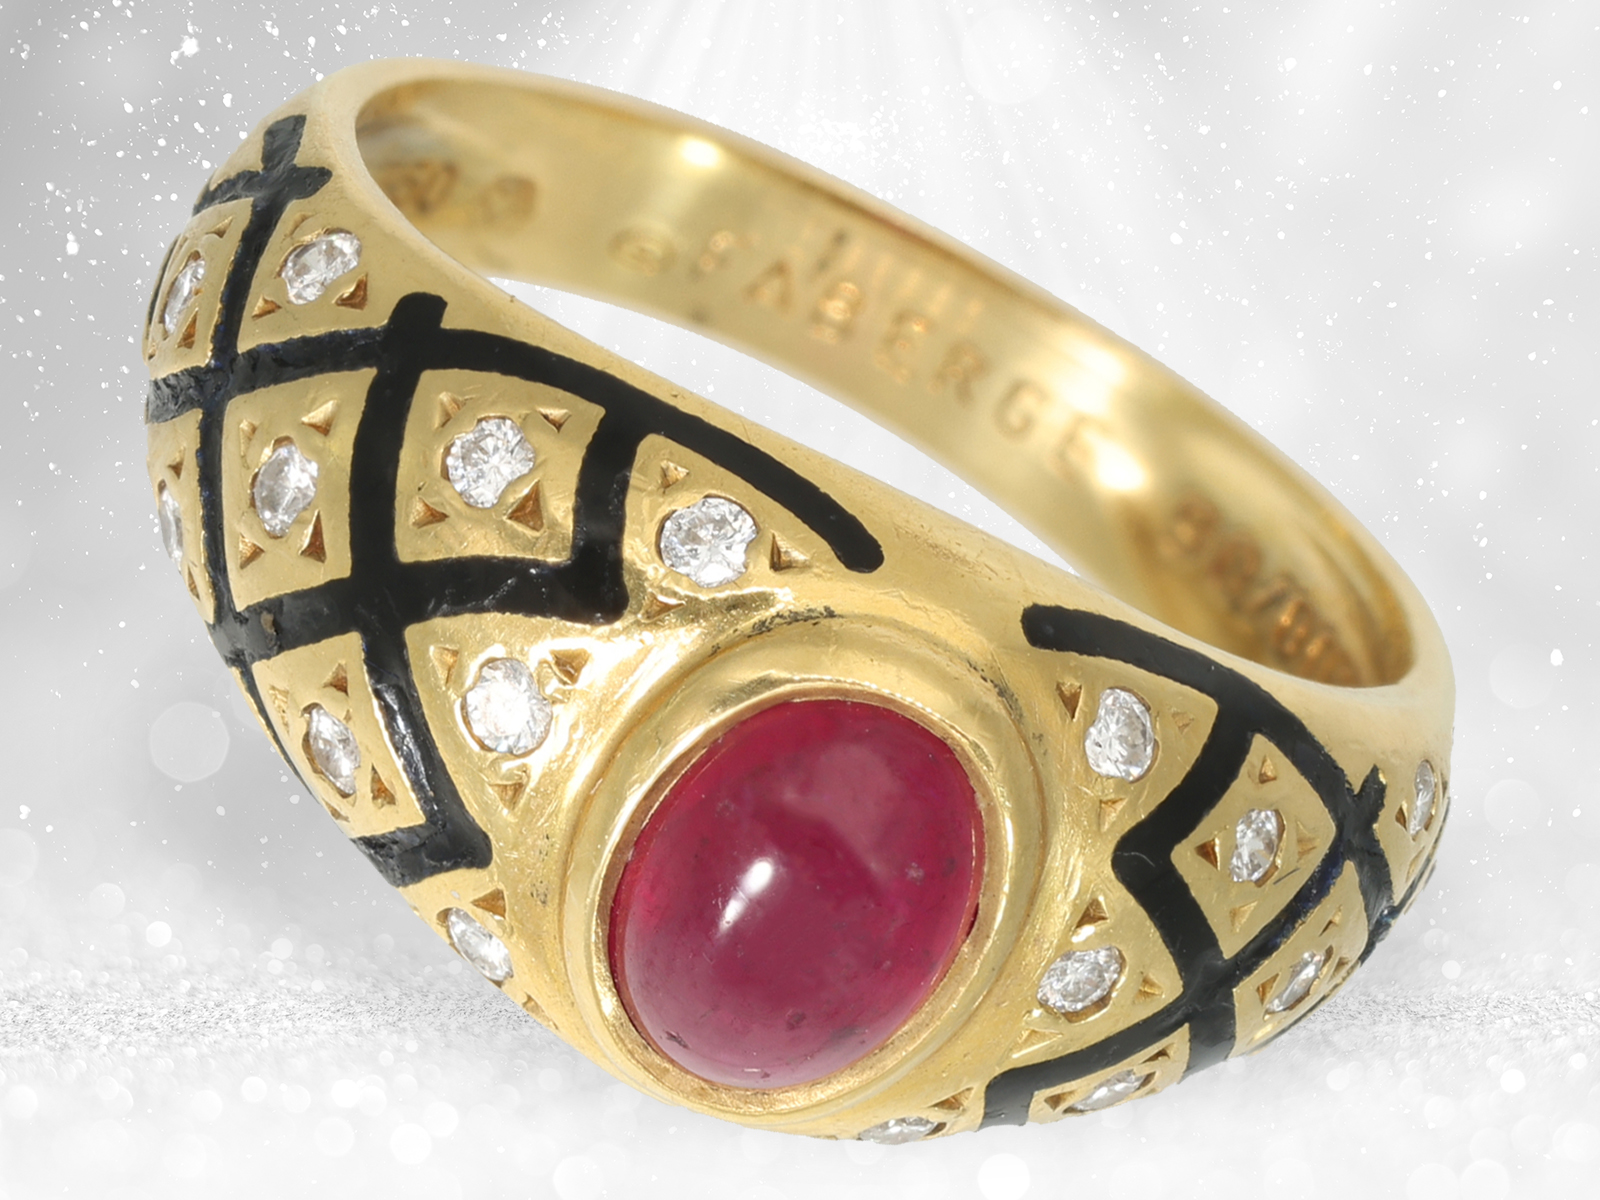 Rare vintage ruby/brilliant-cut diamond ring, FABERGÉ JEWELLERY by VICTOR MAYER - Image 4 of 5